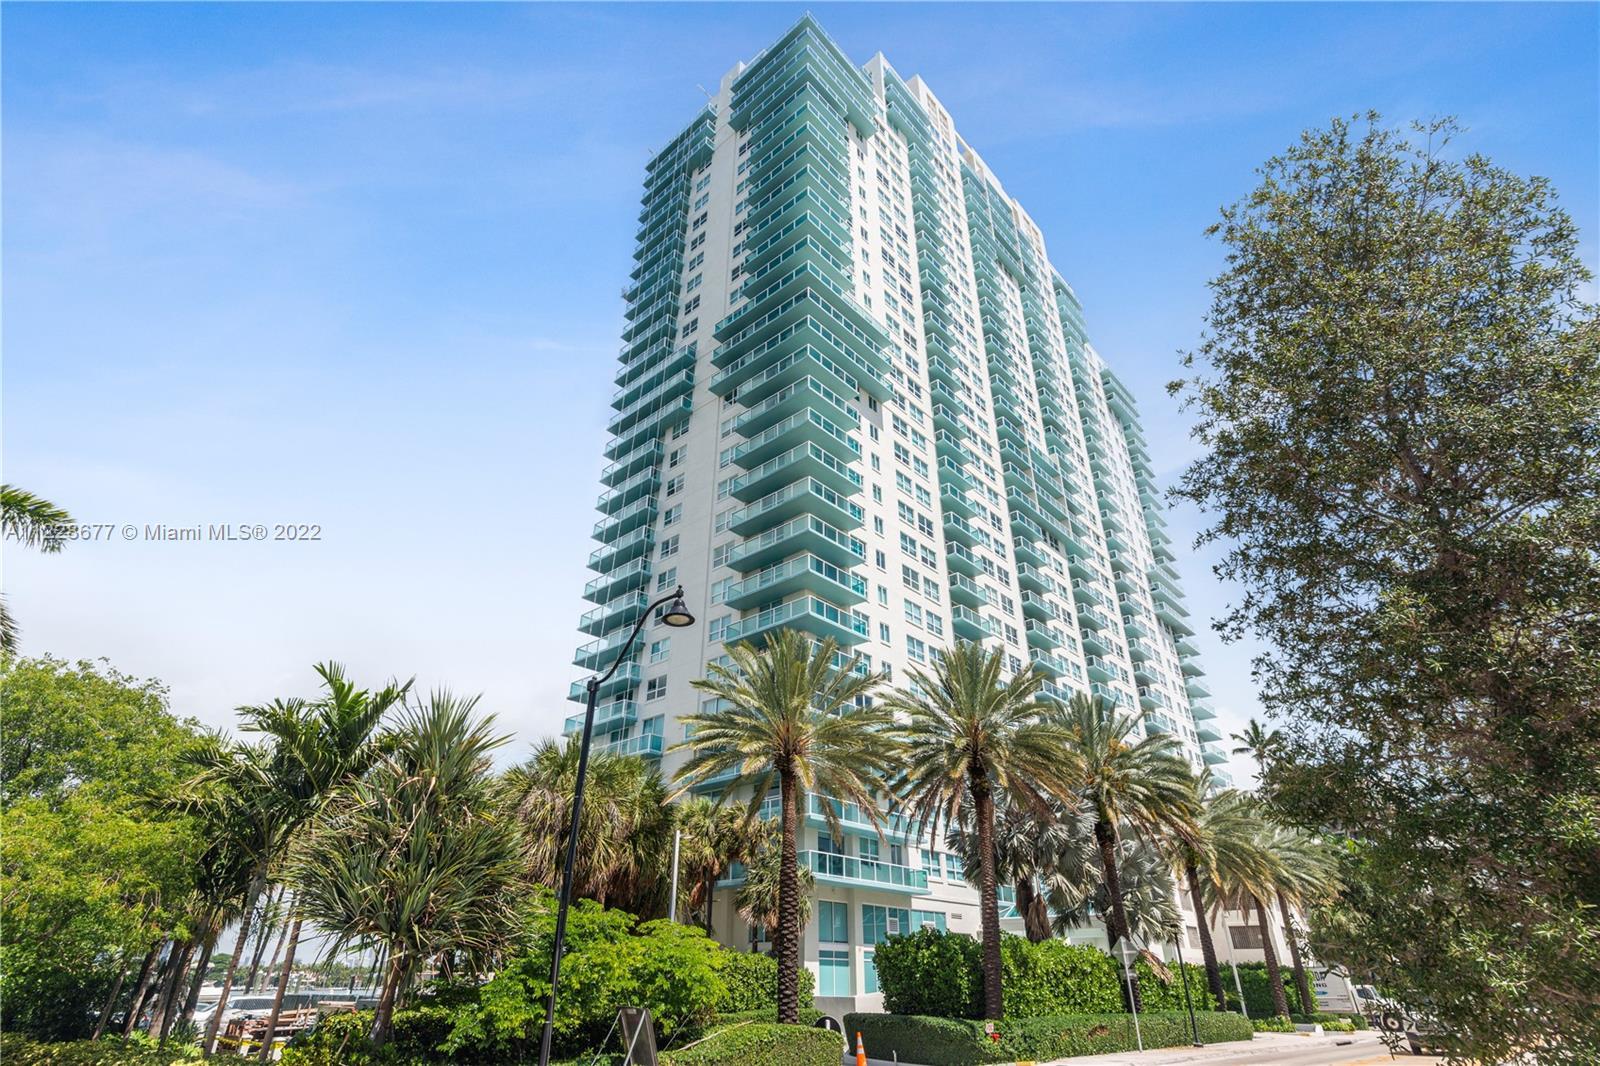 Luxury central unit at the Floridian. Fabulous view facing Start Island, Biscayne Bay and Downtown.